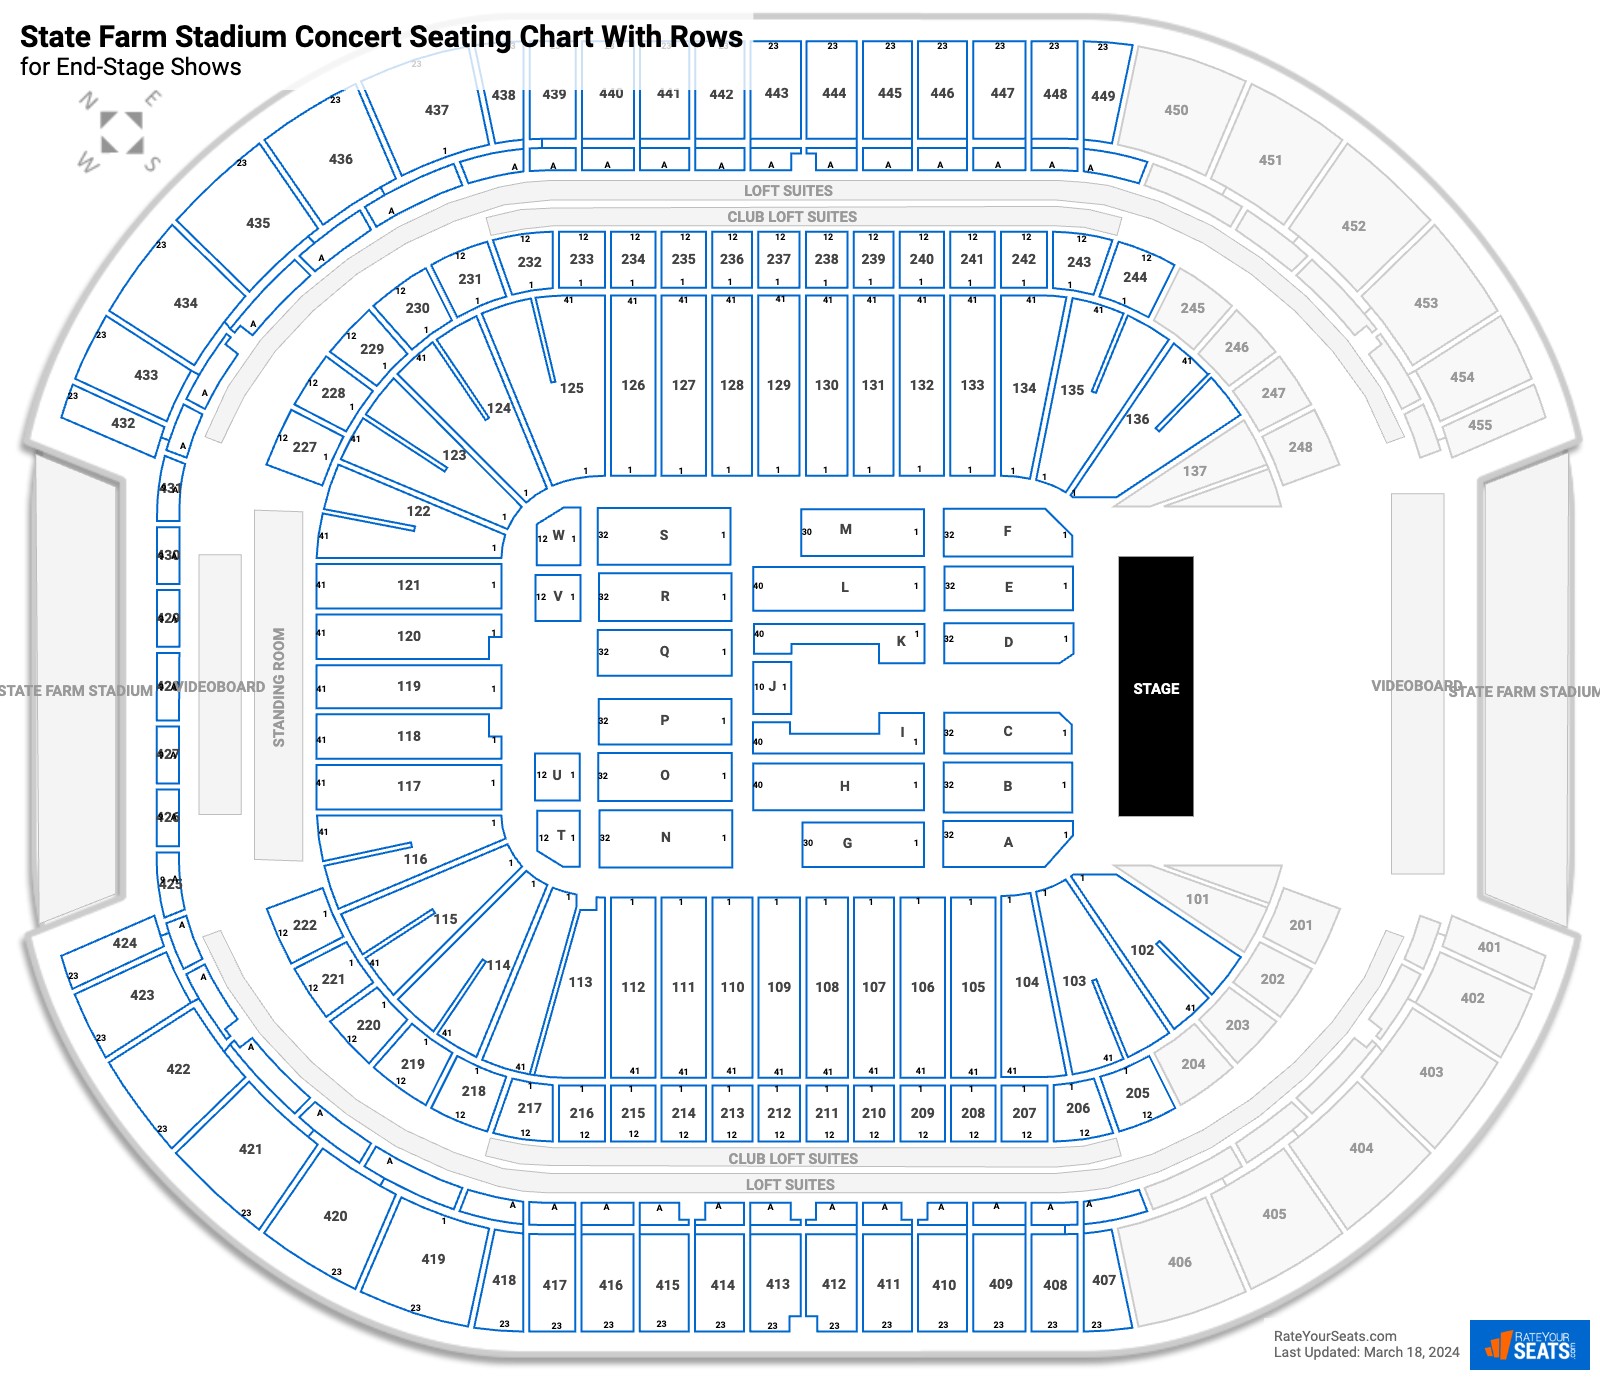 State Farm Stadium Seating Charts for Concerts - RateYourSeats.com